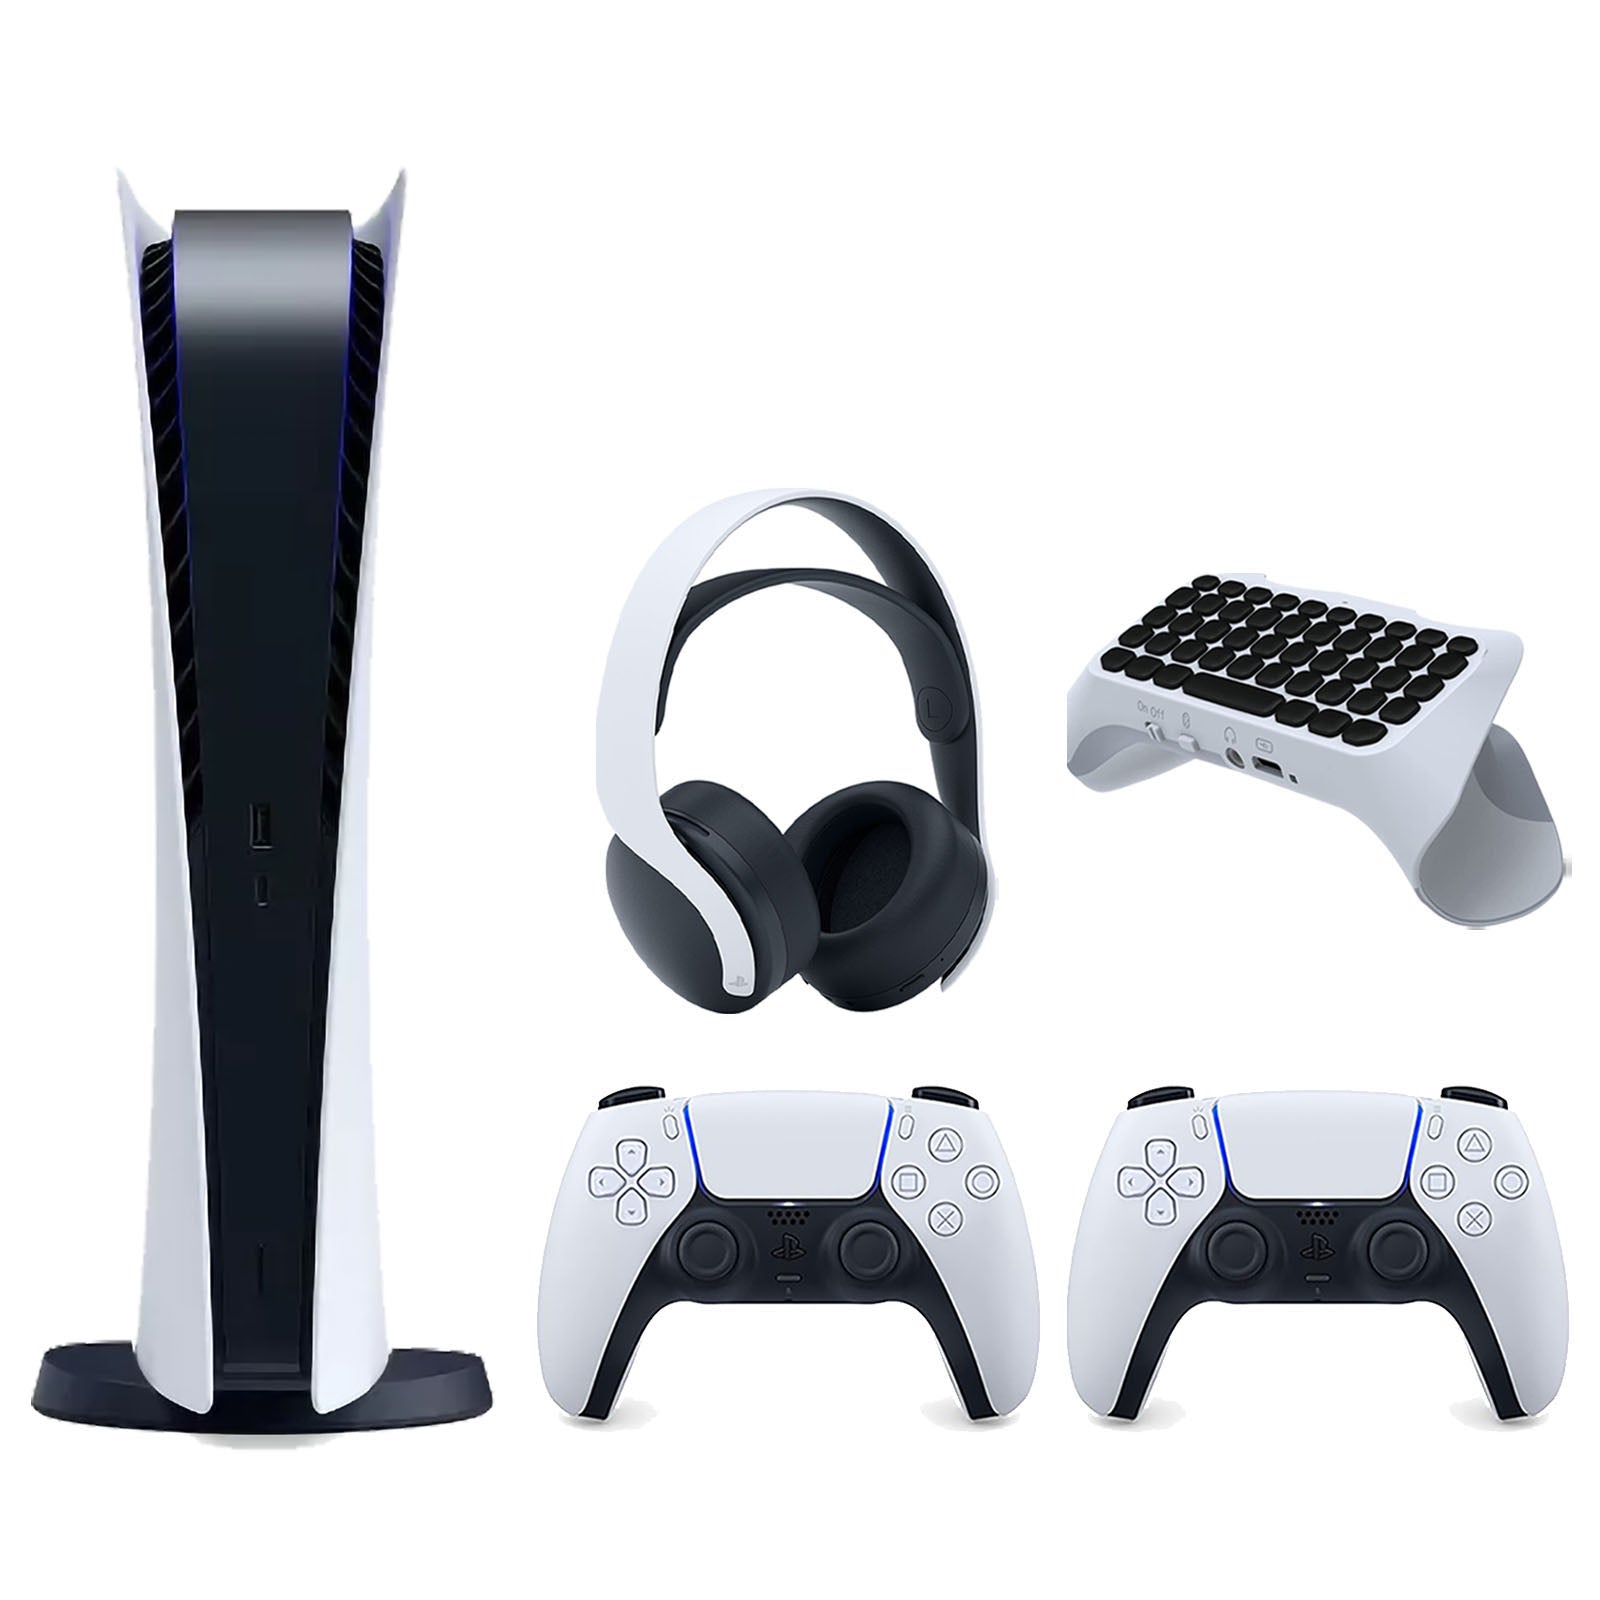 Sony Playstation 5 Digital Edition Console with Extra White Controller, White PULSE 3D Headset and Surge QuickType 2.0 Wireless PS5 Controller Keypad Bundle - Pro-Distributing